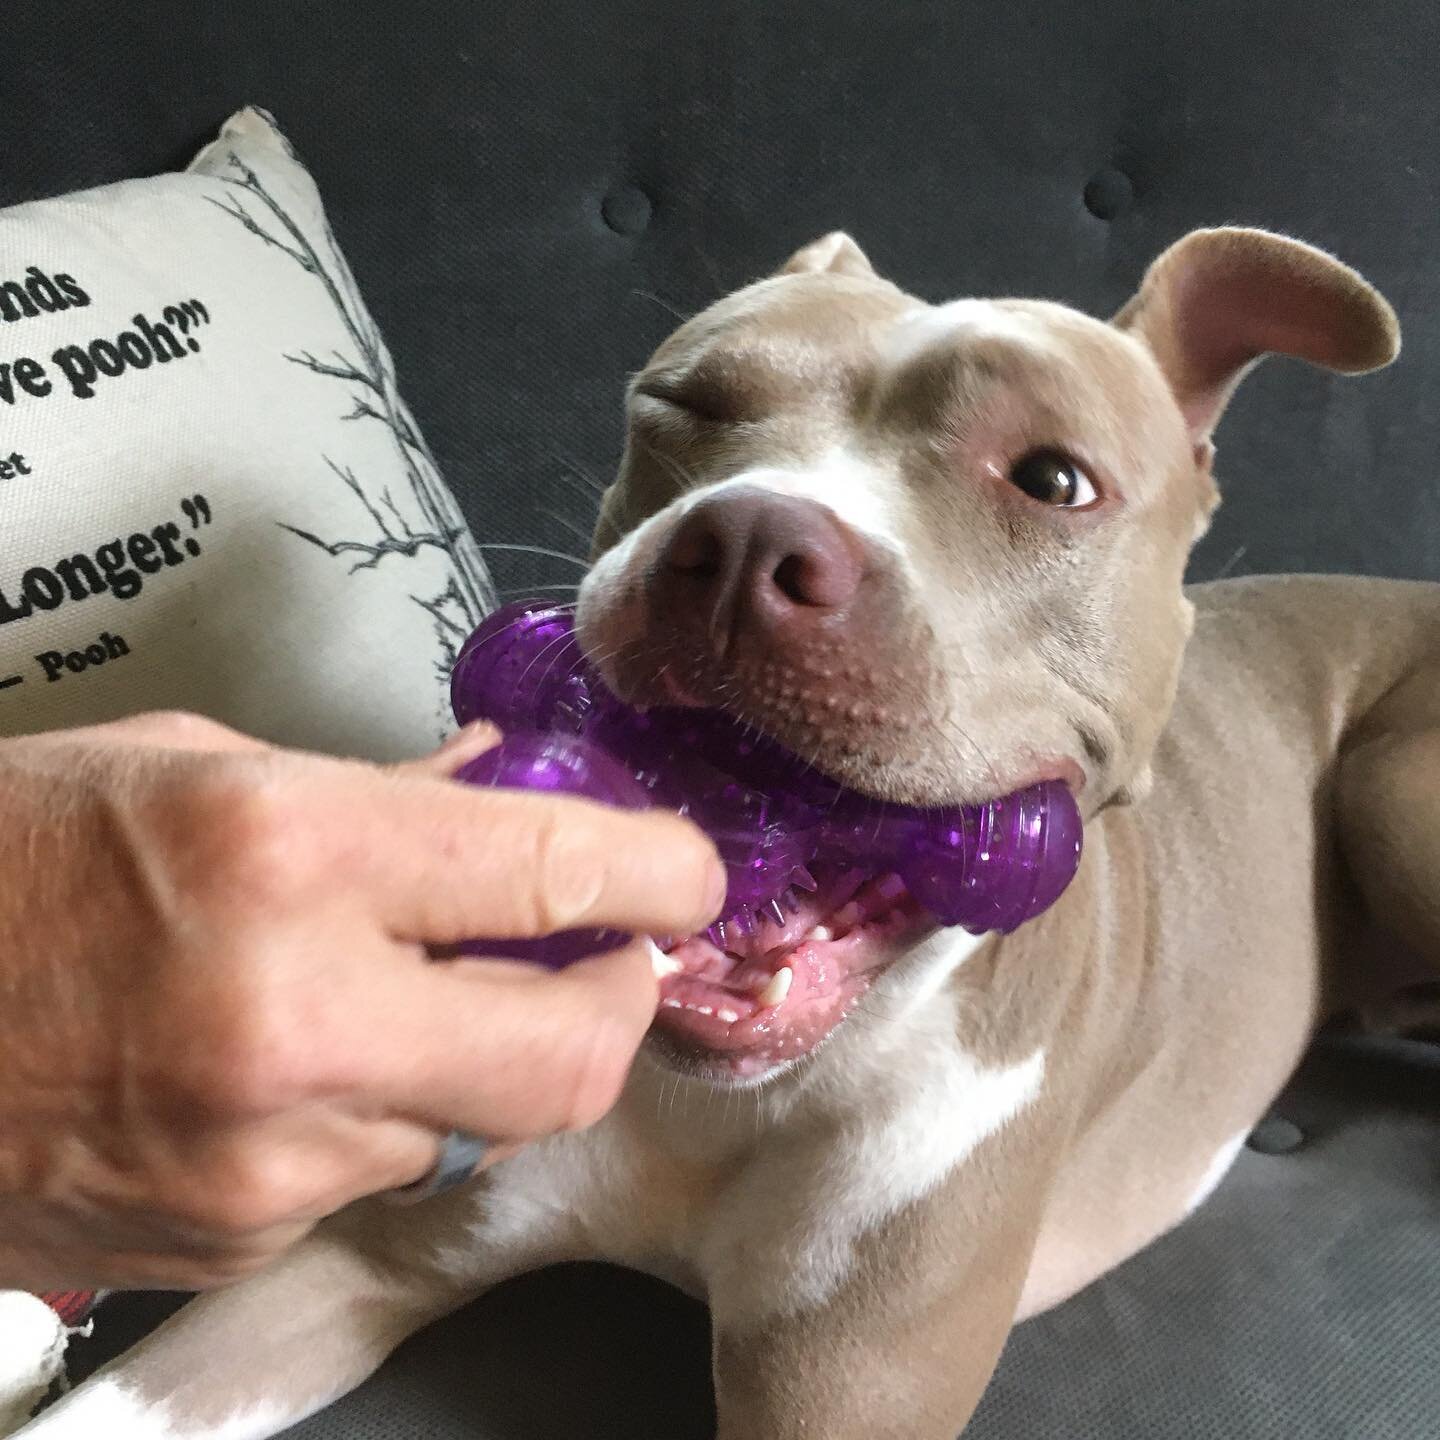 Starling got a gift from a client! What&rsquo;s YOUR favorite fidget toy??
.
.
.
.
#ohheyanxiety #imnotanxiousyoureanxious #fidgettoys #maybeeverythingisokay #morepeacelessstress  #nowandnextcounseling #psychotherapy
#rescuedog #therapydog #inviteanx